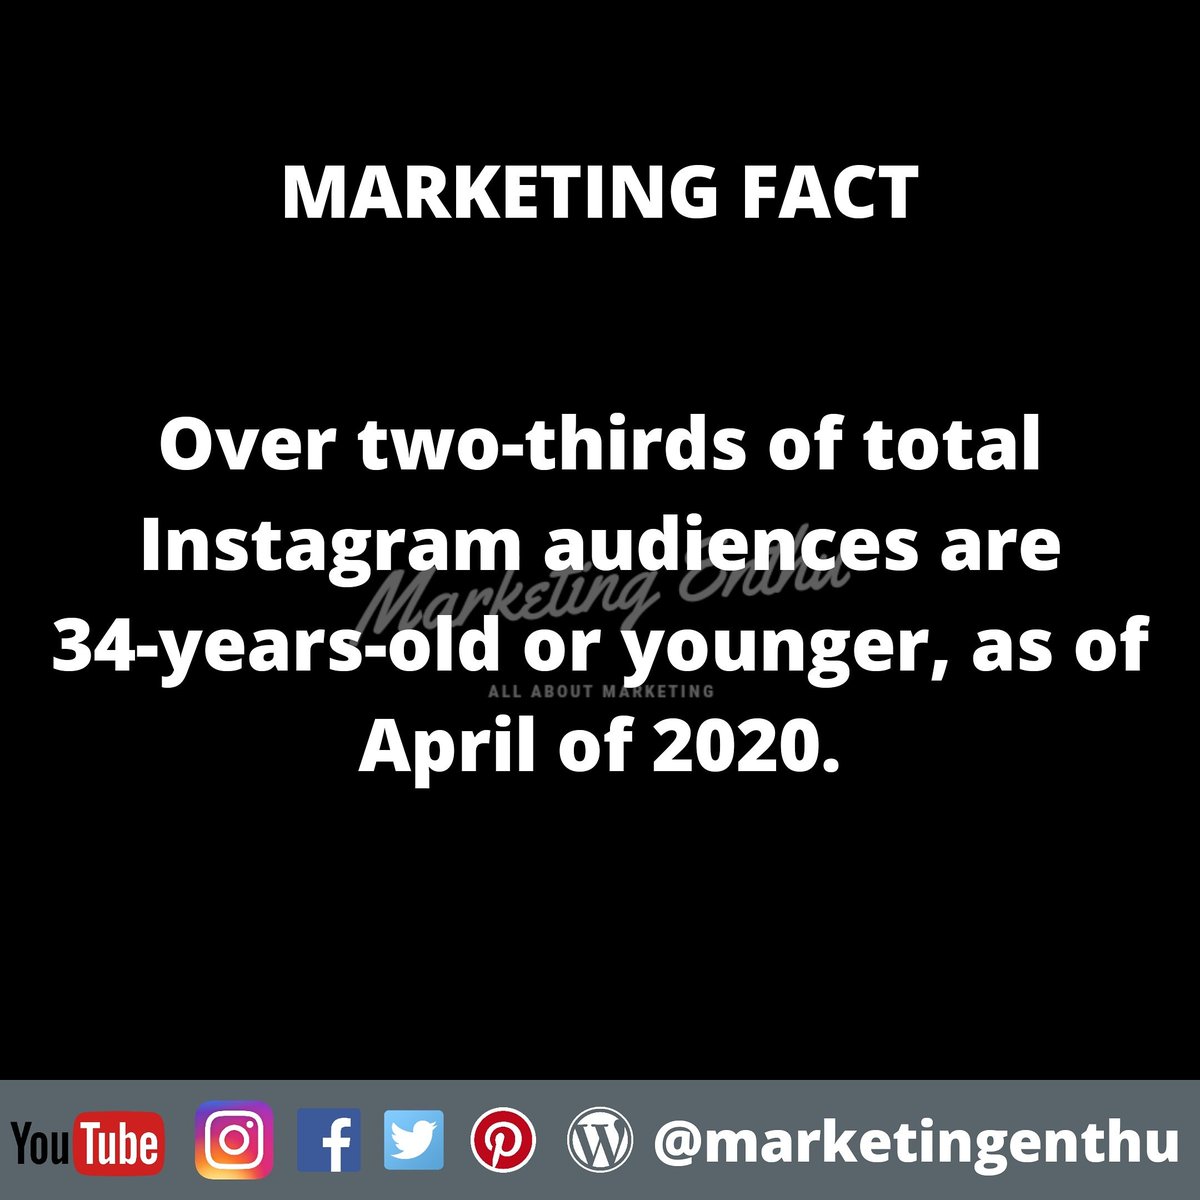 Over two-thirds of total Instagram audiences are 34-years-old or younger, as of April of 2020. 

#marketingenthu #marketingfacts #instagram #youngsters #ads #brandawareness #productmarketing #servicemarketing #advertising #advertisingstrategy #userstatistics #audience #userdata